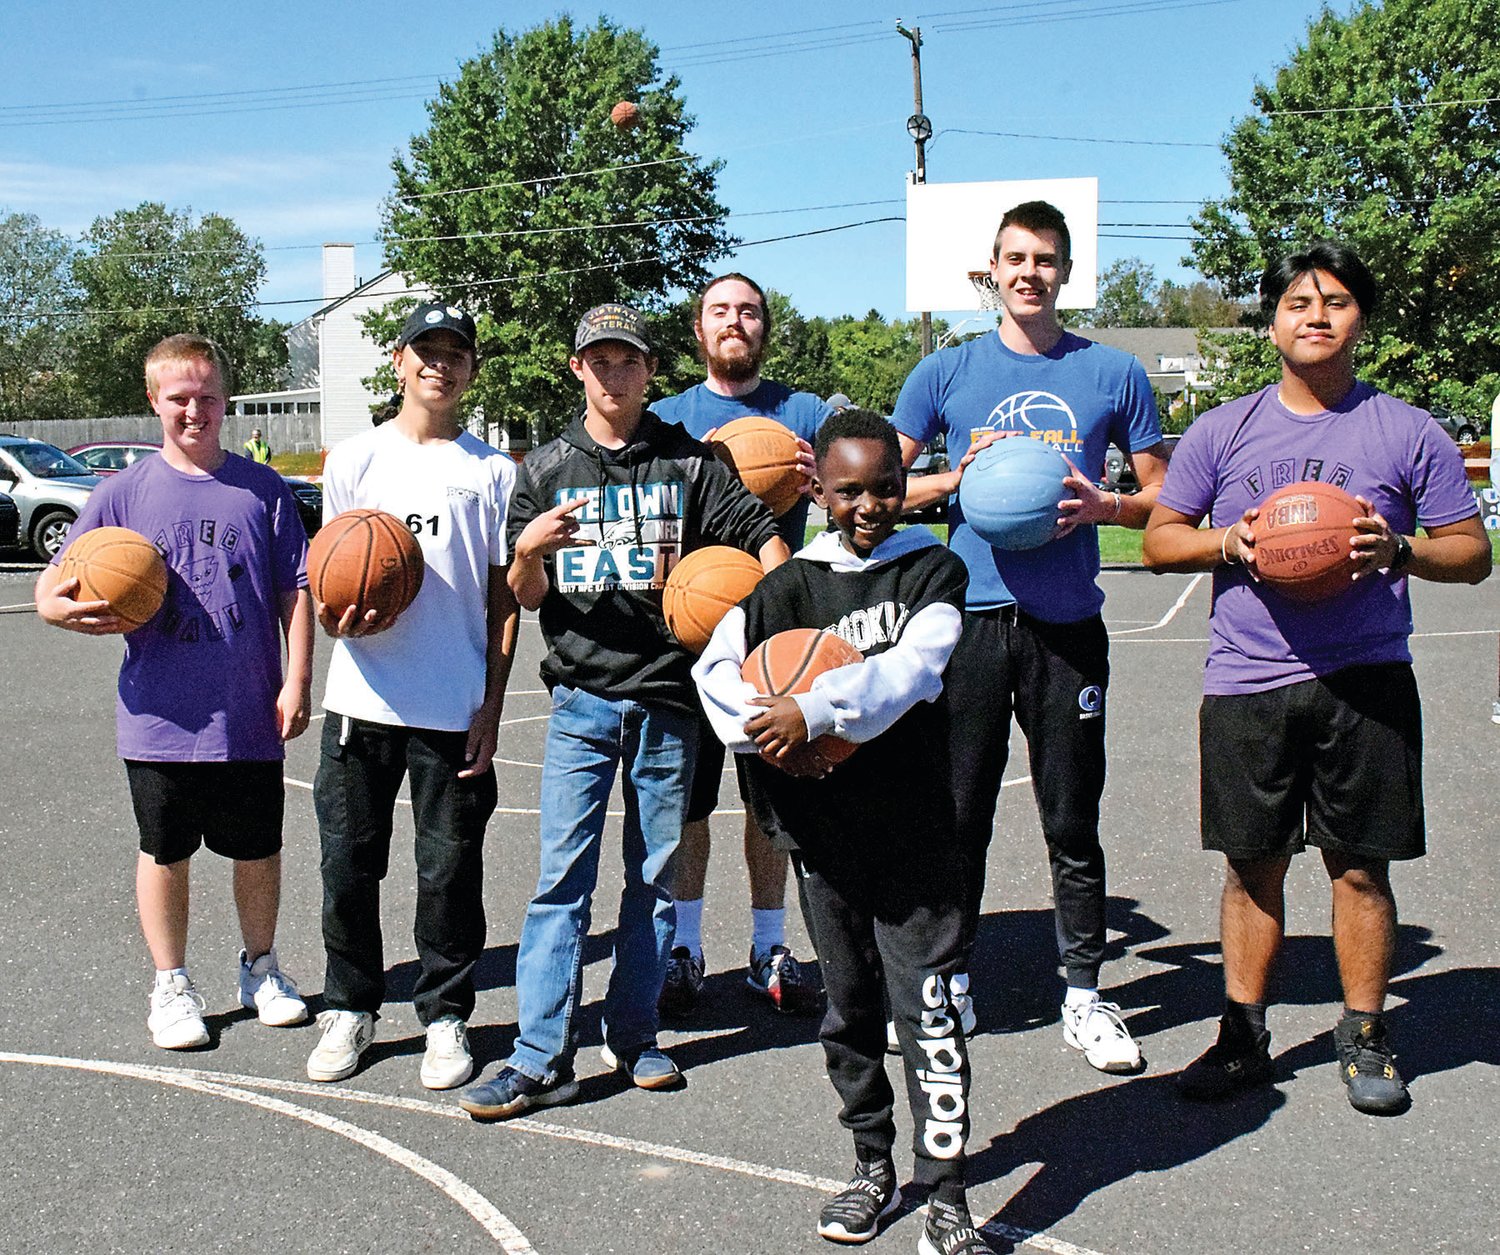 A basketball challenge was a part of Free Fall’s events.